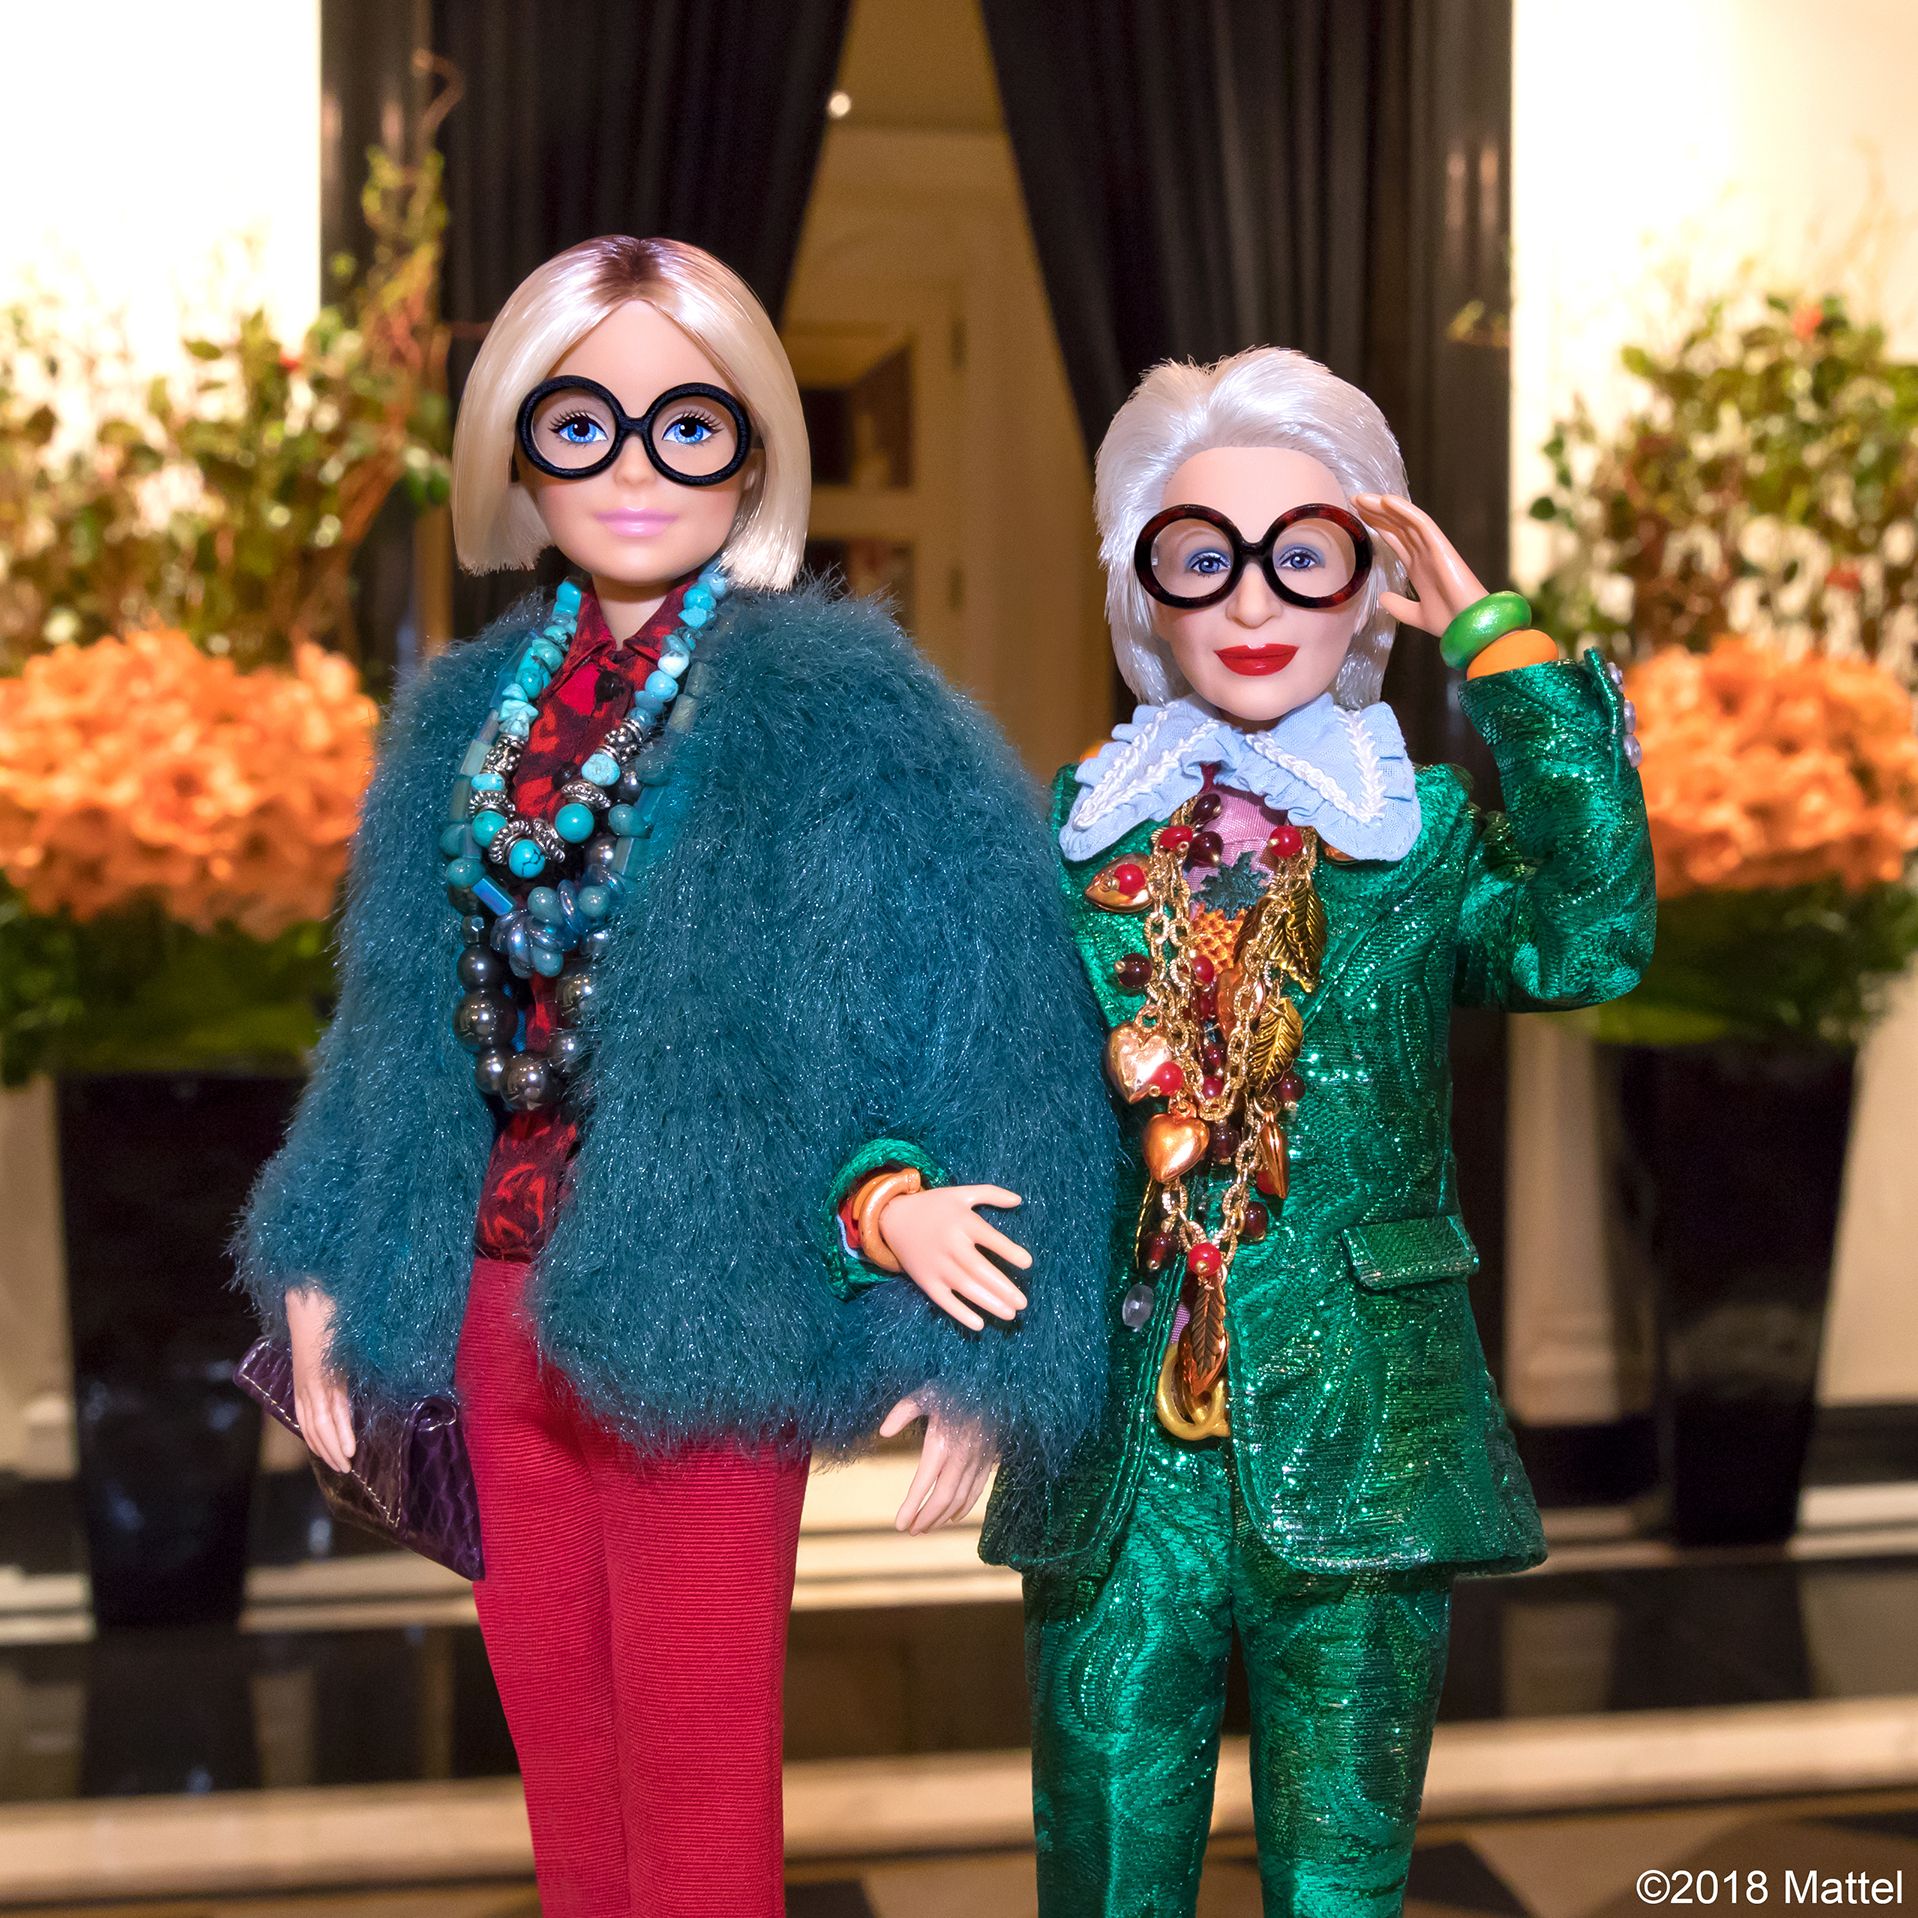 Iris Apfel Just Became the Oldest 